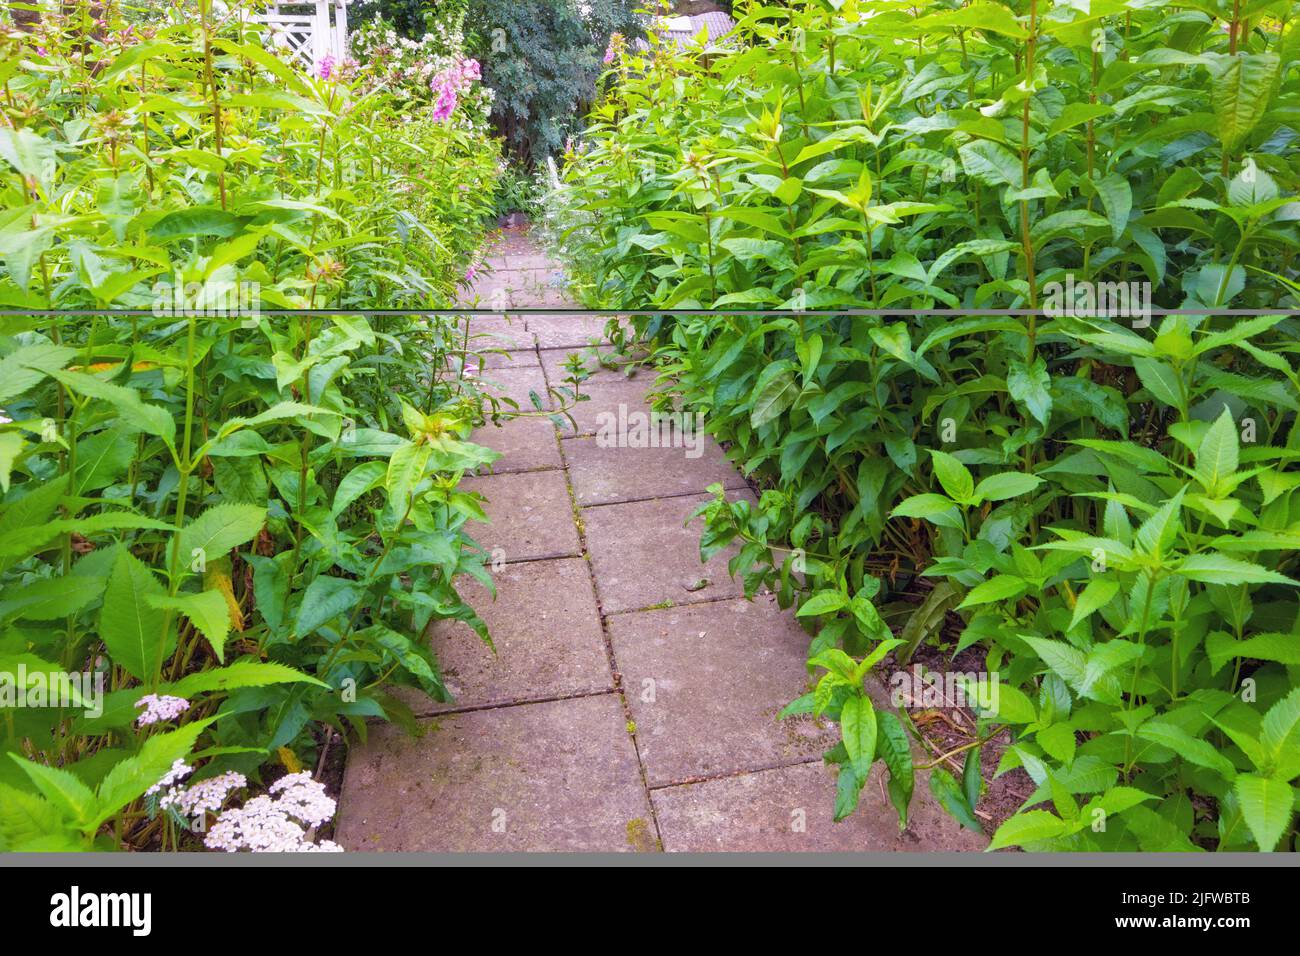 Bushes and shrubs of chinese figwort growing along a paved garden path in botanical nursery. Cultivating scrophularia ningpoensis or ningpo figwort Stock Photo